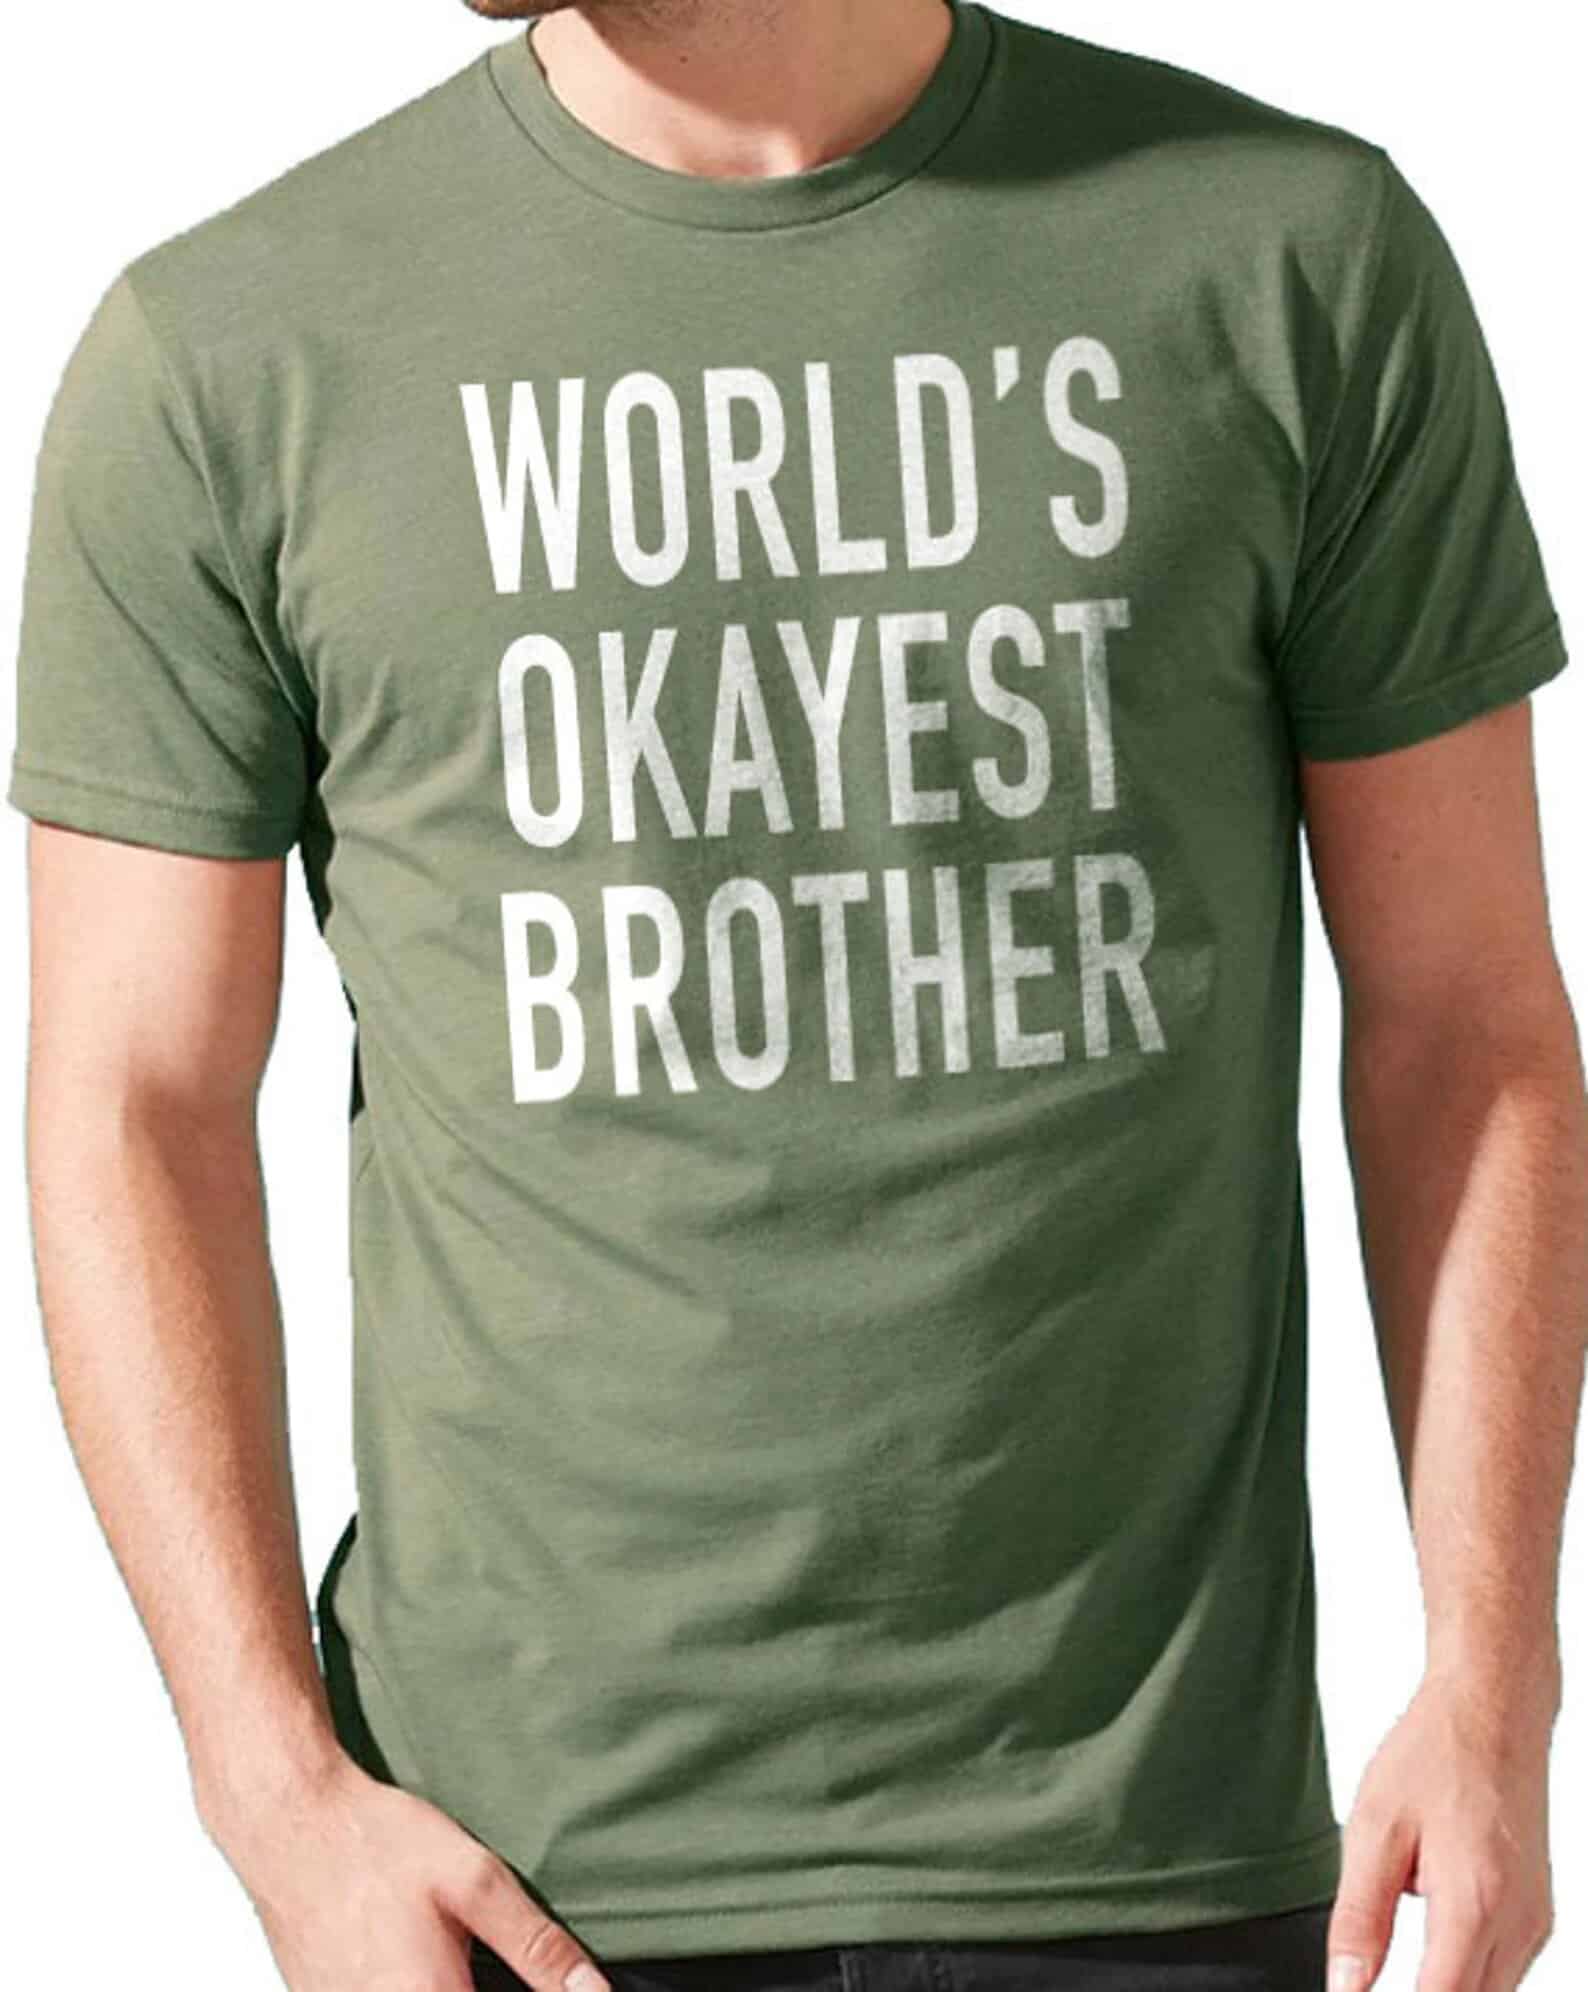 Practical Father's Day gift for brother: Brother Funny Shirt Men